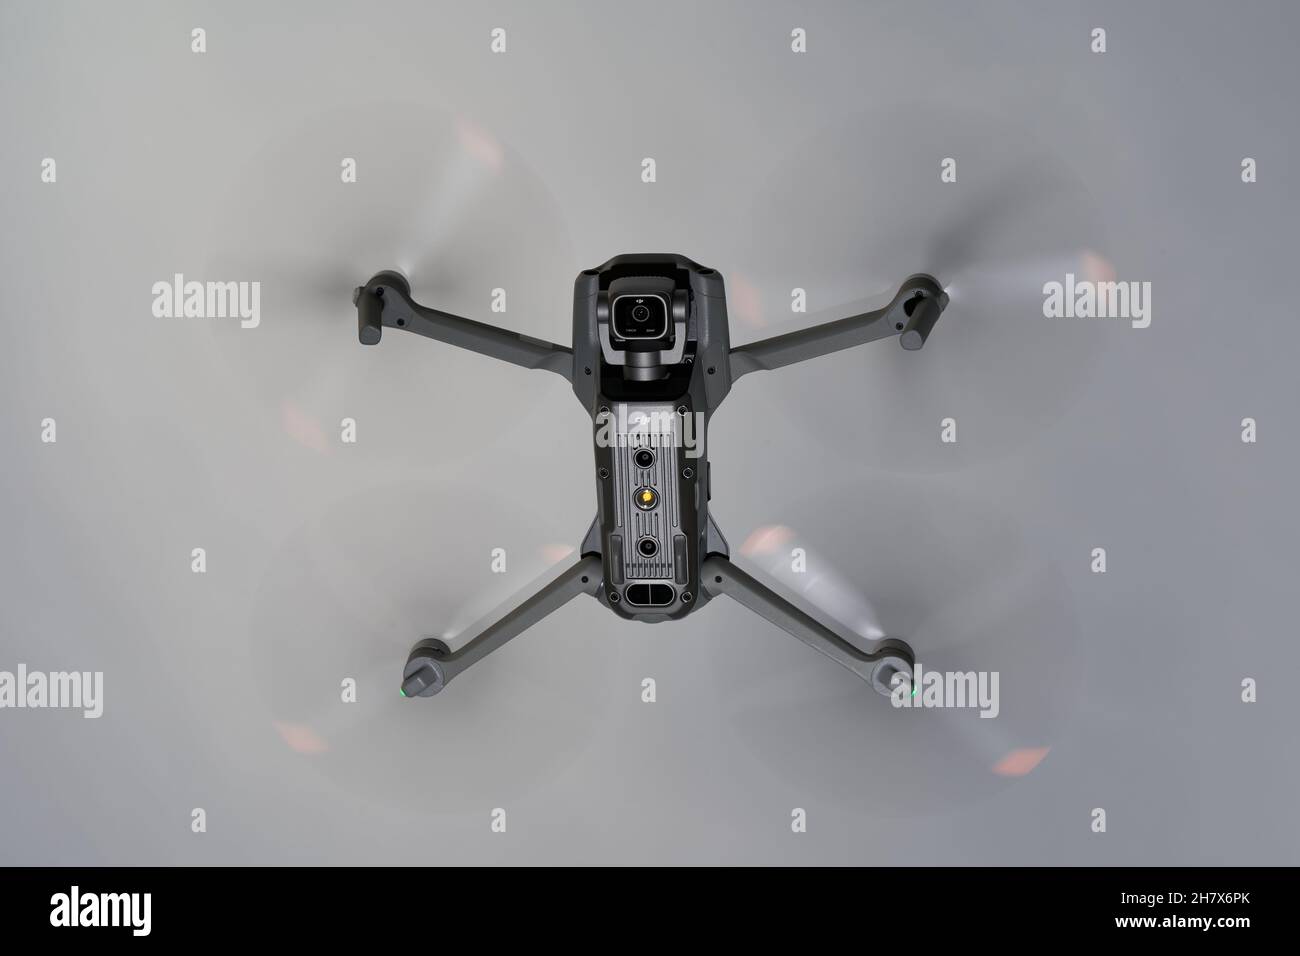 Nürtingen, Germany - June 26, 2021: Drone air 2s from dji hovers in front of gray sky. The 1 inch camera sensor is pointed downwards. Up view. Stock Photo